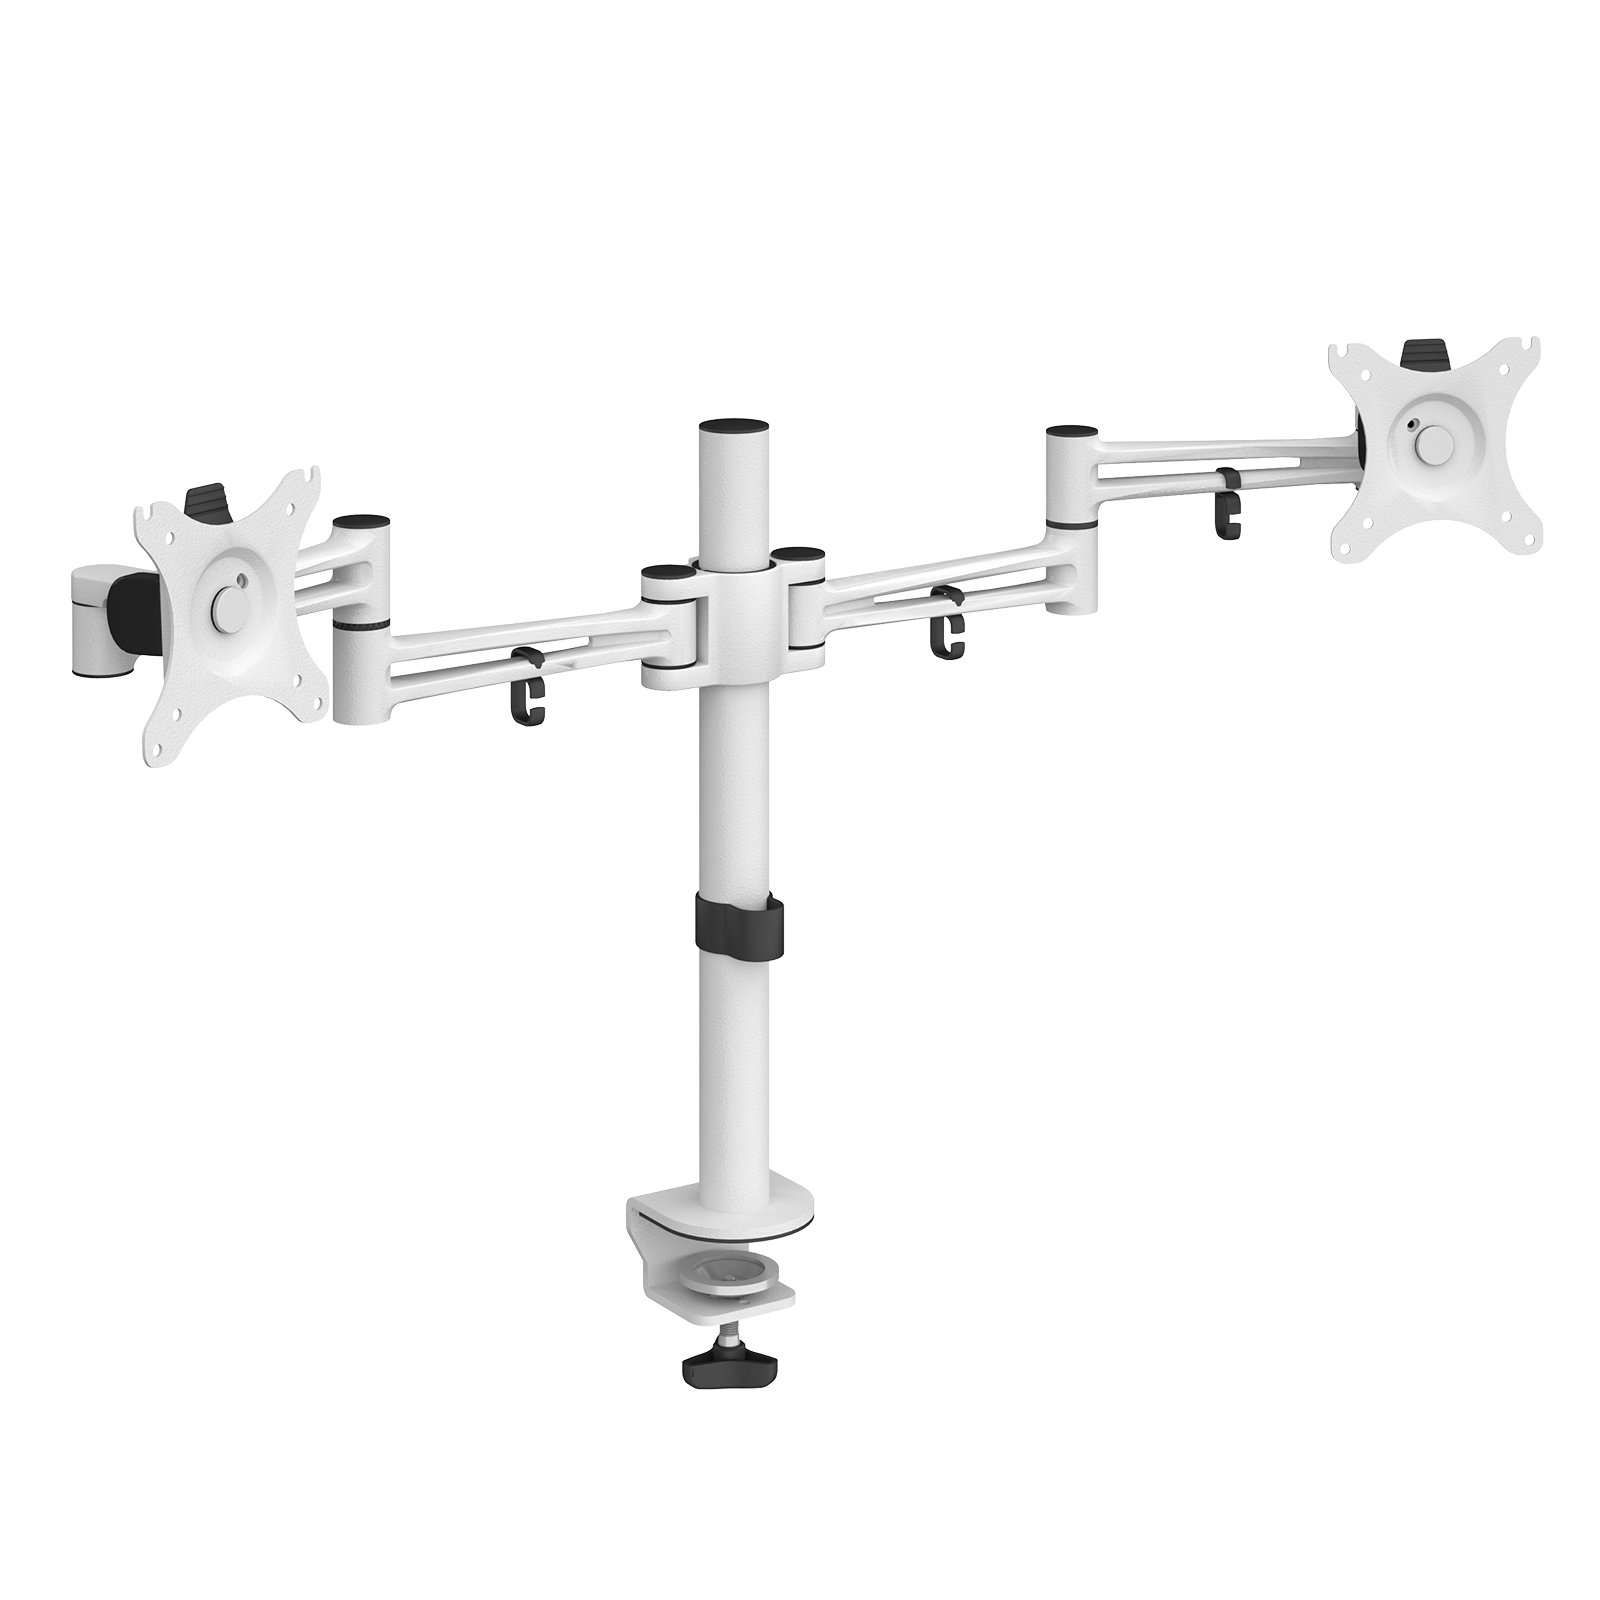 Arms Luna double flat screen monitor arm - white